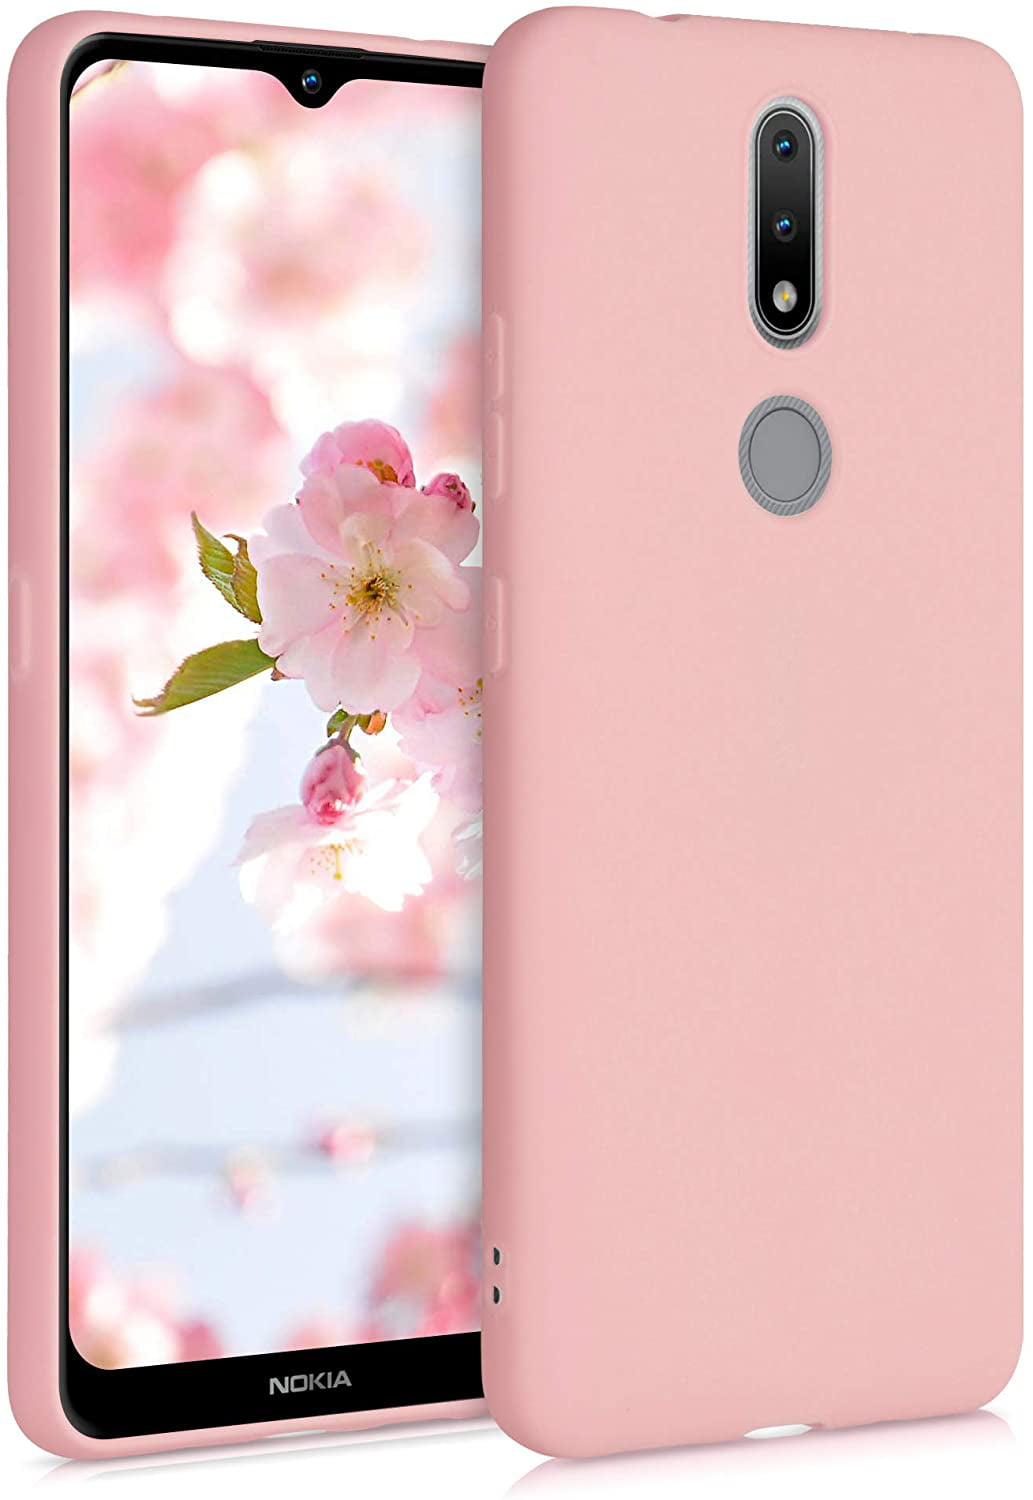 Case Soft Slim Smooth Flexible Protective Phone Cover Metallic Rose Gold kwmobile TPU Case Compatible with OnePlus 3 3T 